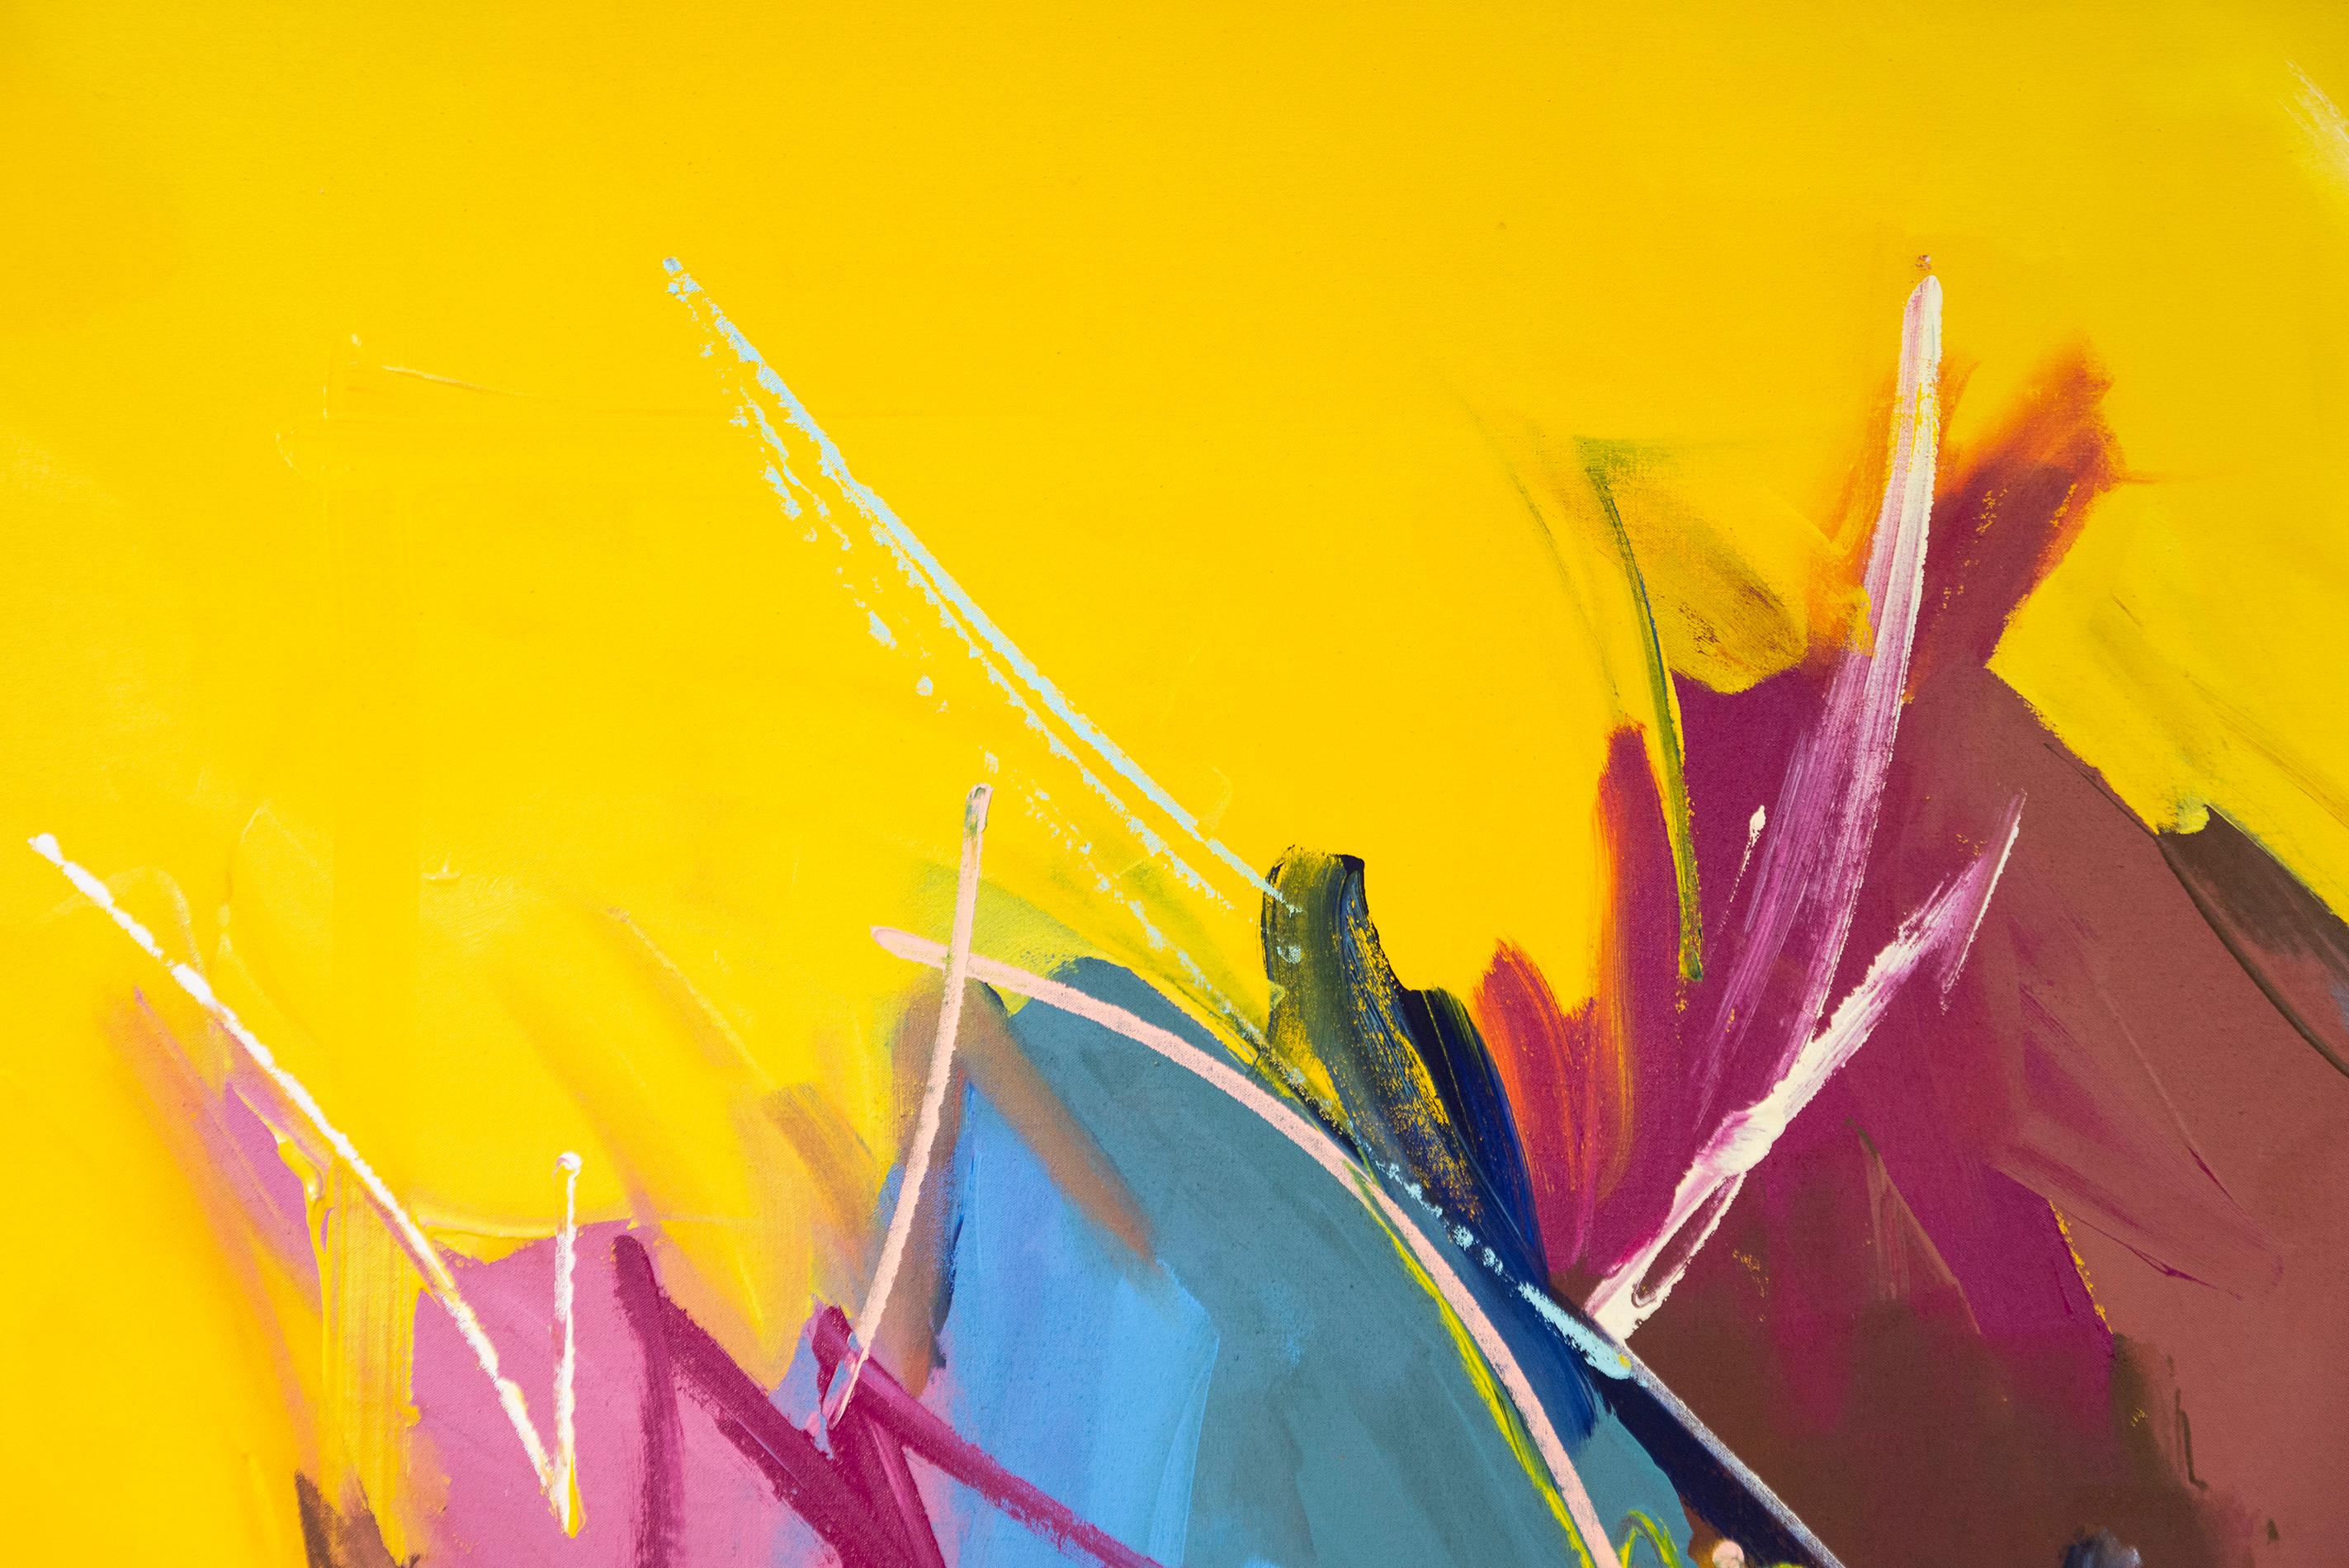 A tapestry of glorious colour meets the viewer’s eye in this gorgeous abstract work by Milly Ristvedt. The master colourist uses bright yellow as a brilliant backdrop to a cloud of gestural swatches of red, pink, blue, brown, black, purple and